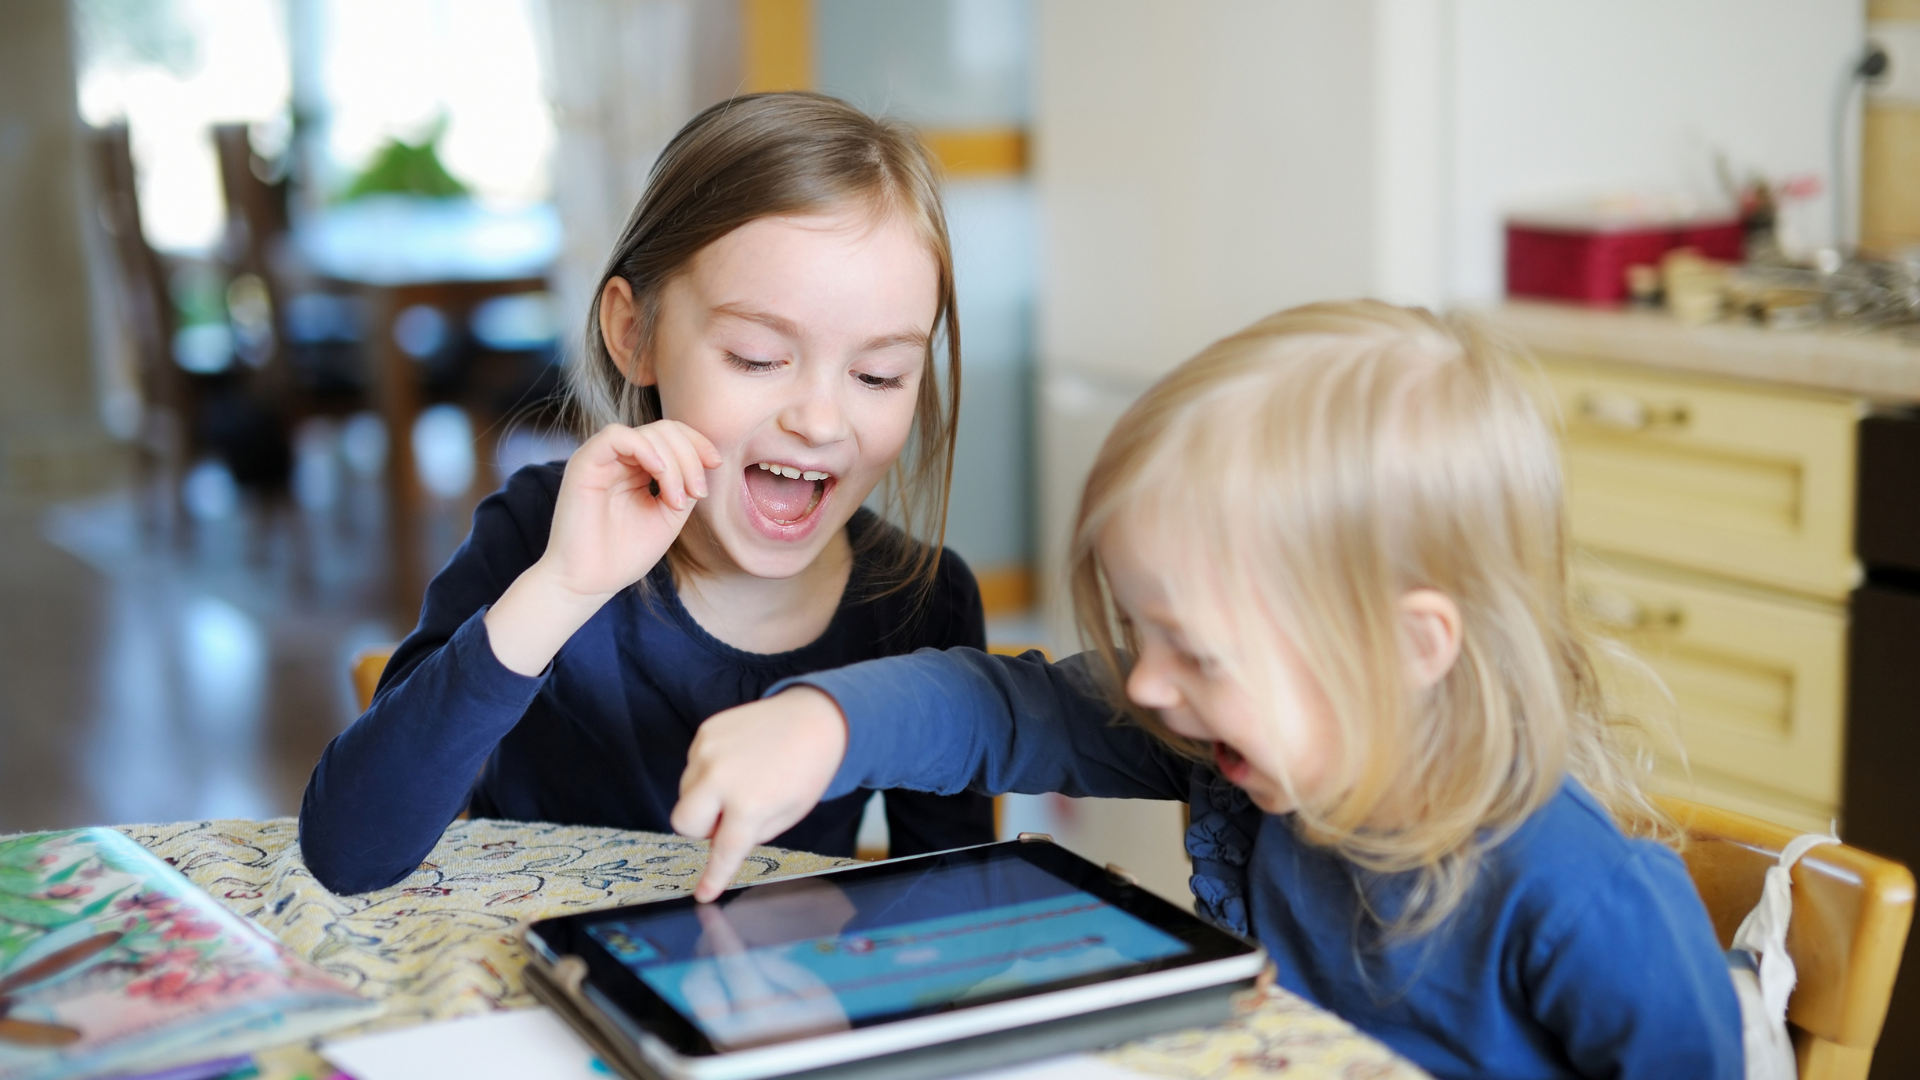 Two young girls playing together on a tablet at a table. The younger child is pointing at the tablet and both have their mouths open in laughter.